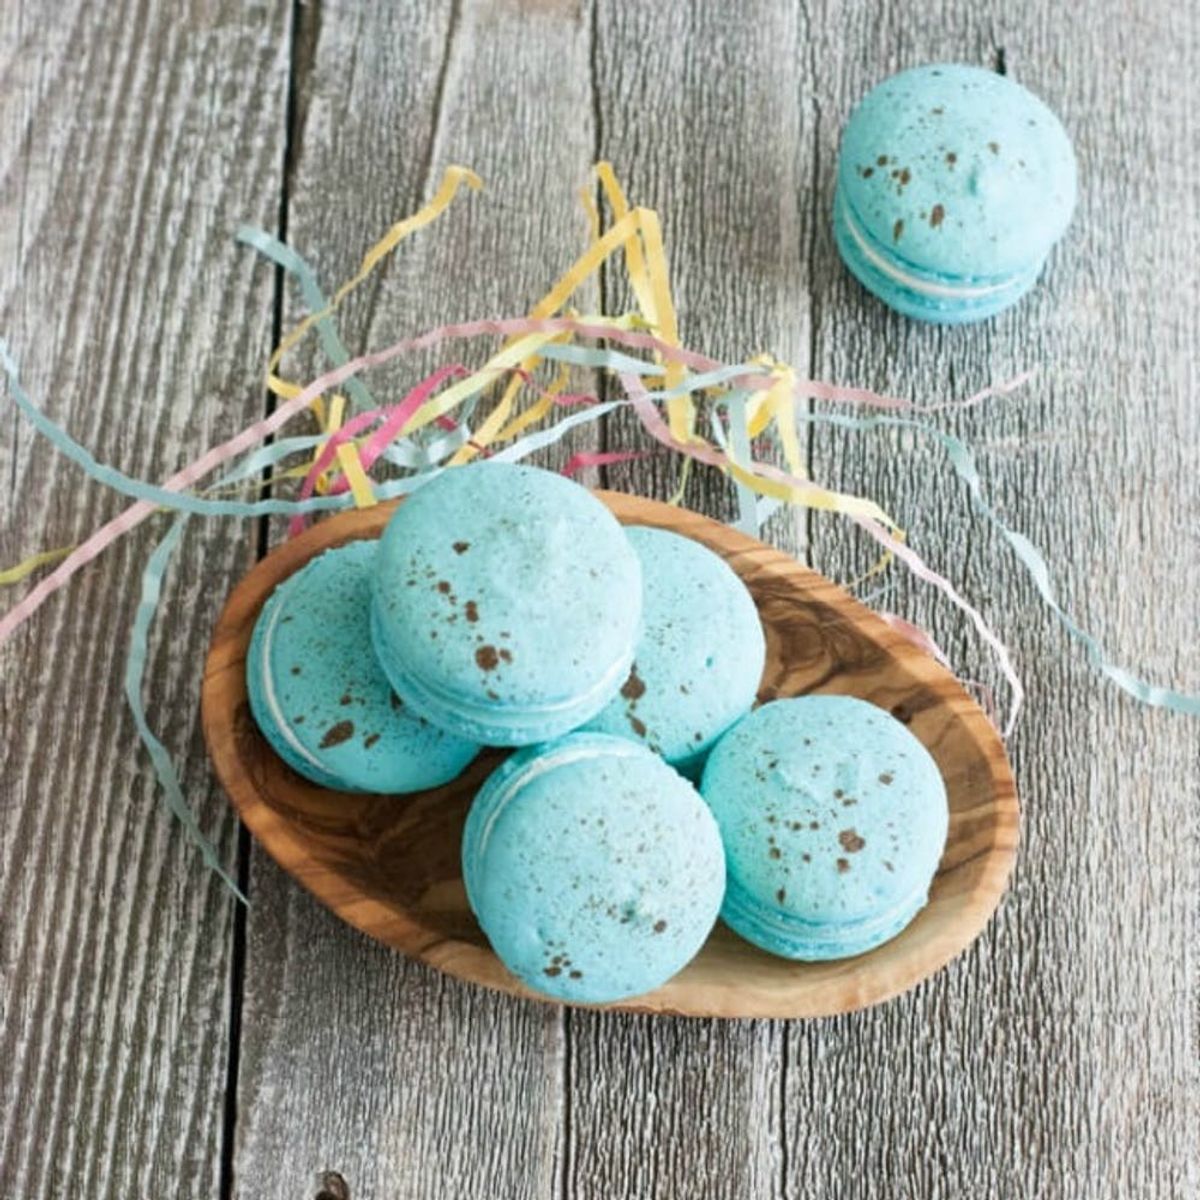 15 Magical Macaron Recipes for Easter and Beyond